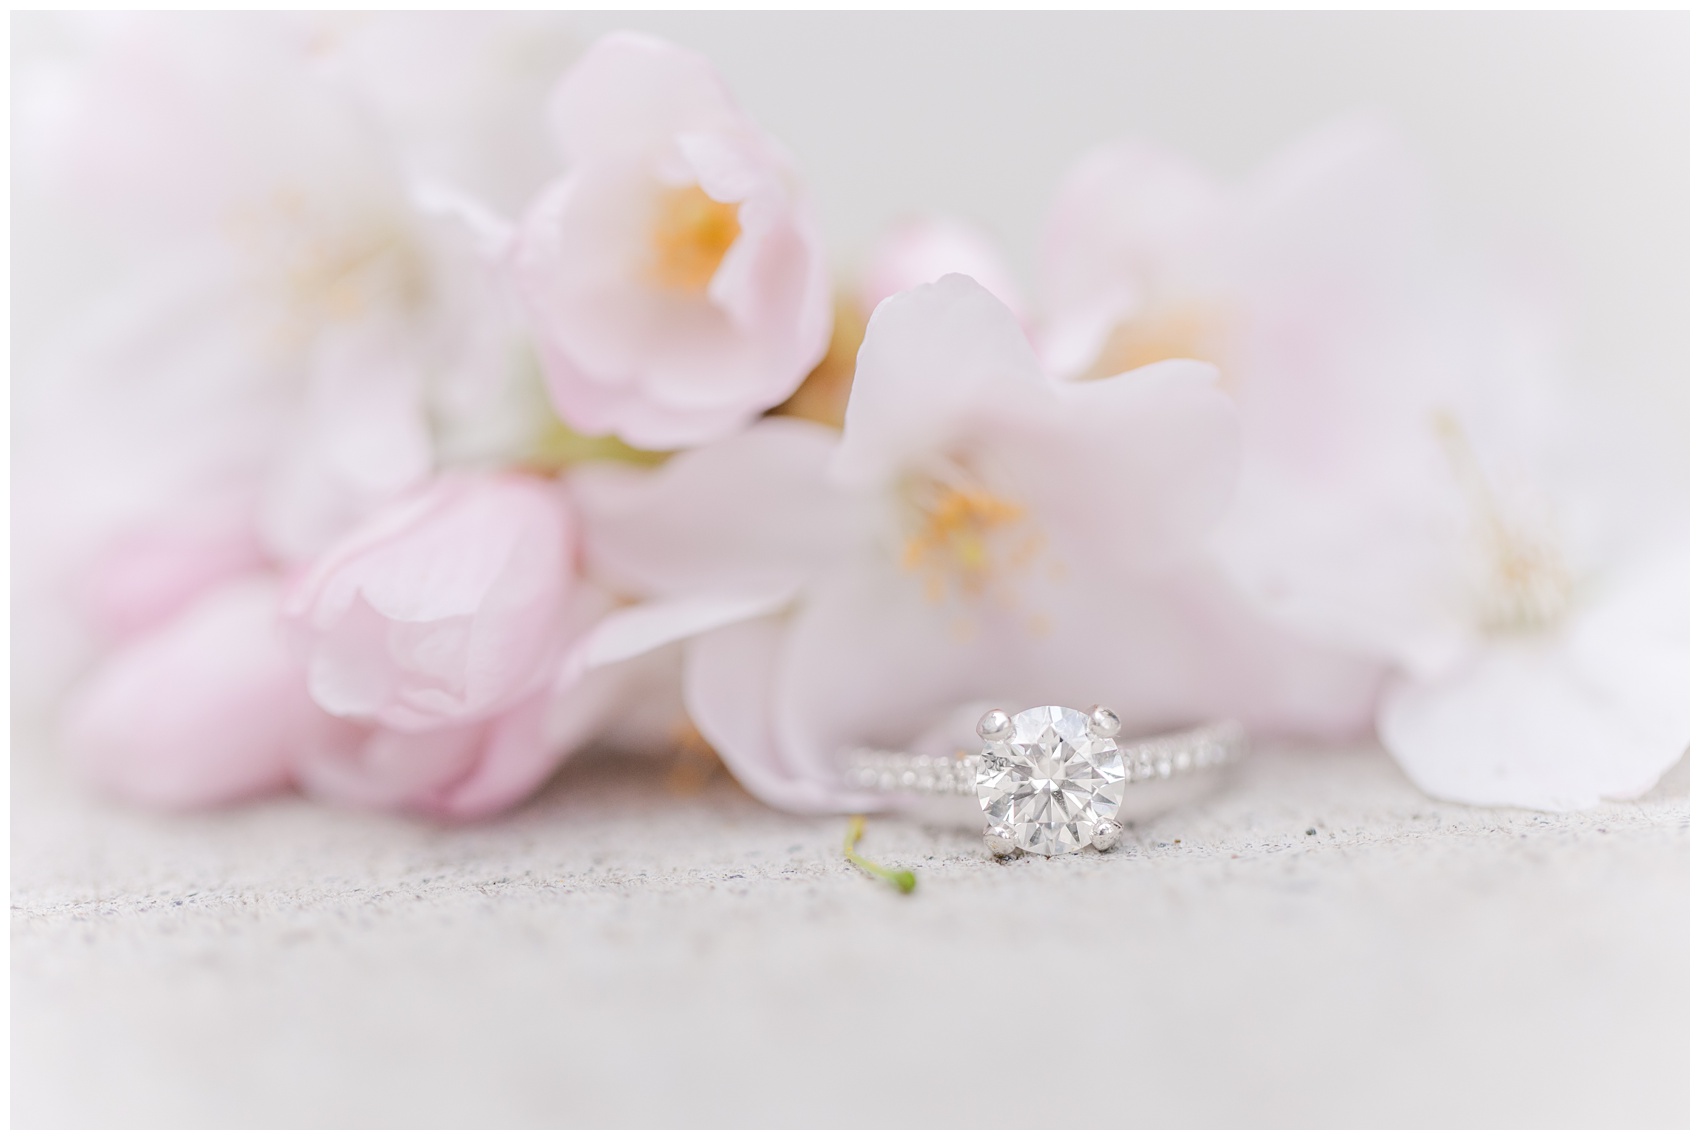 Engagement Ring with cherry blossoms, taken in Richmond, BC